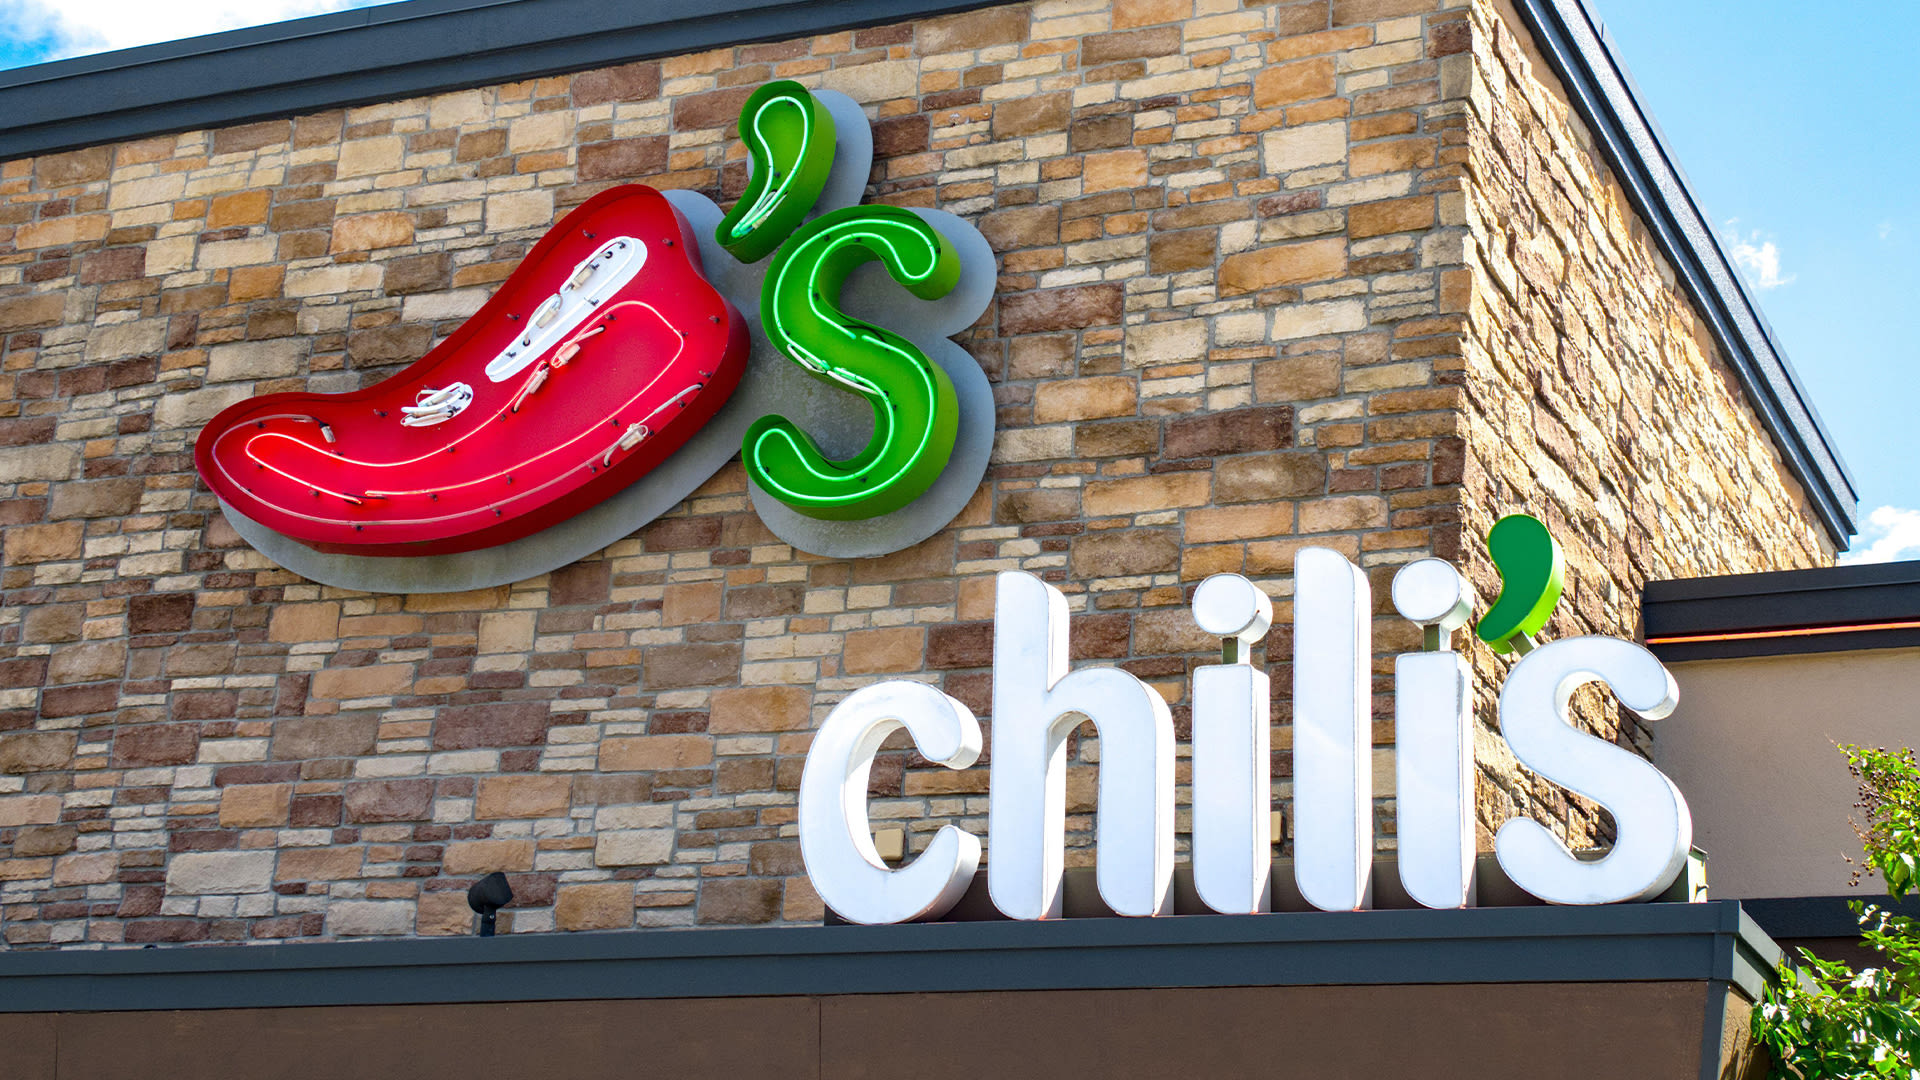 Chili's permanently closes store doors after worrying update on expired lease